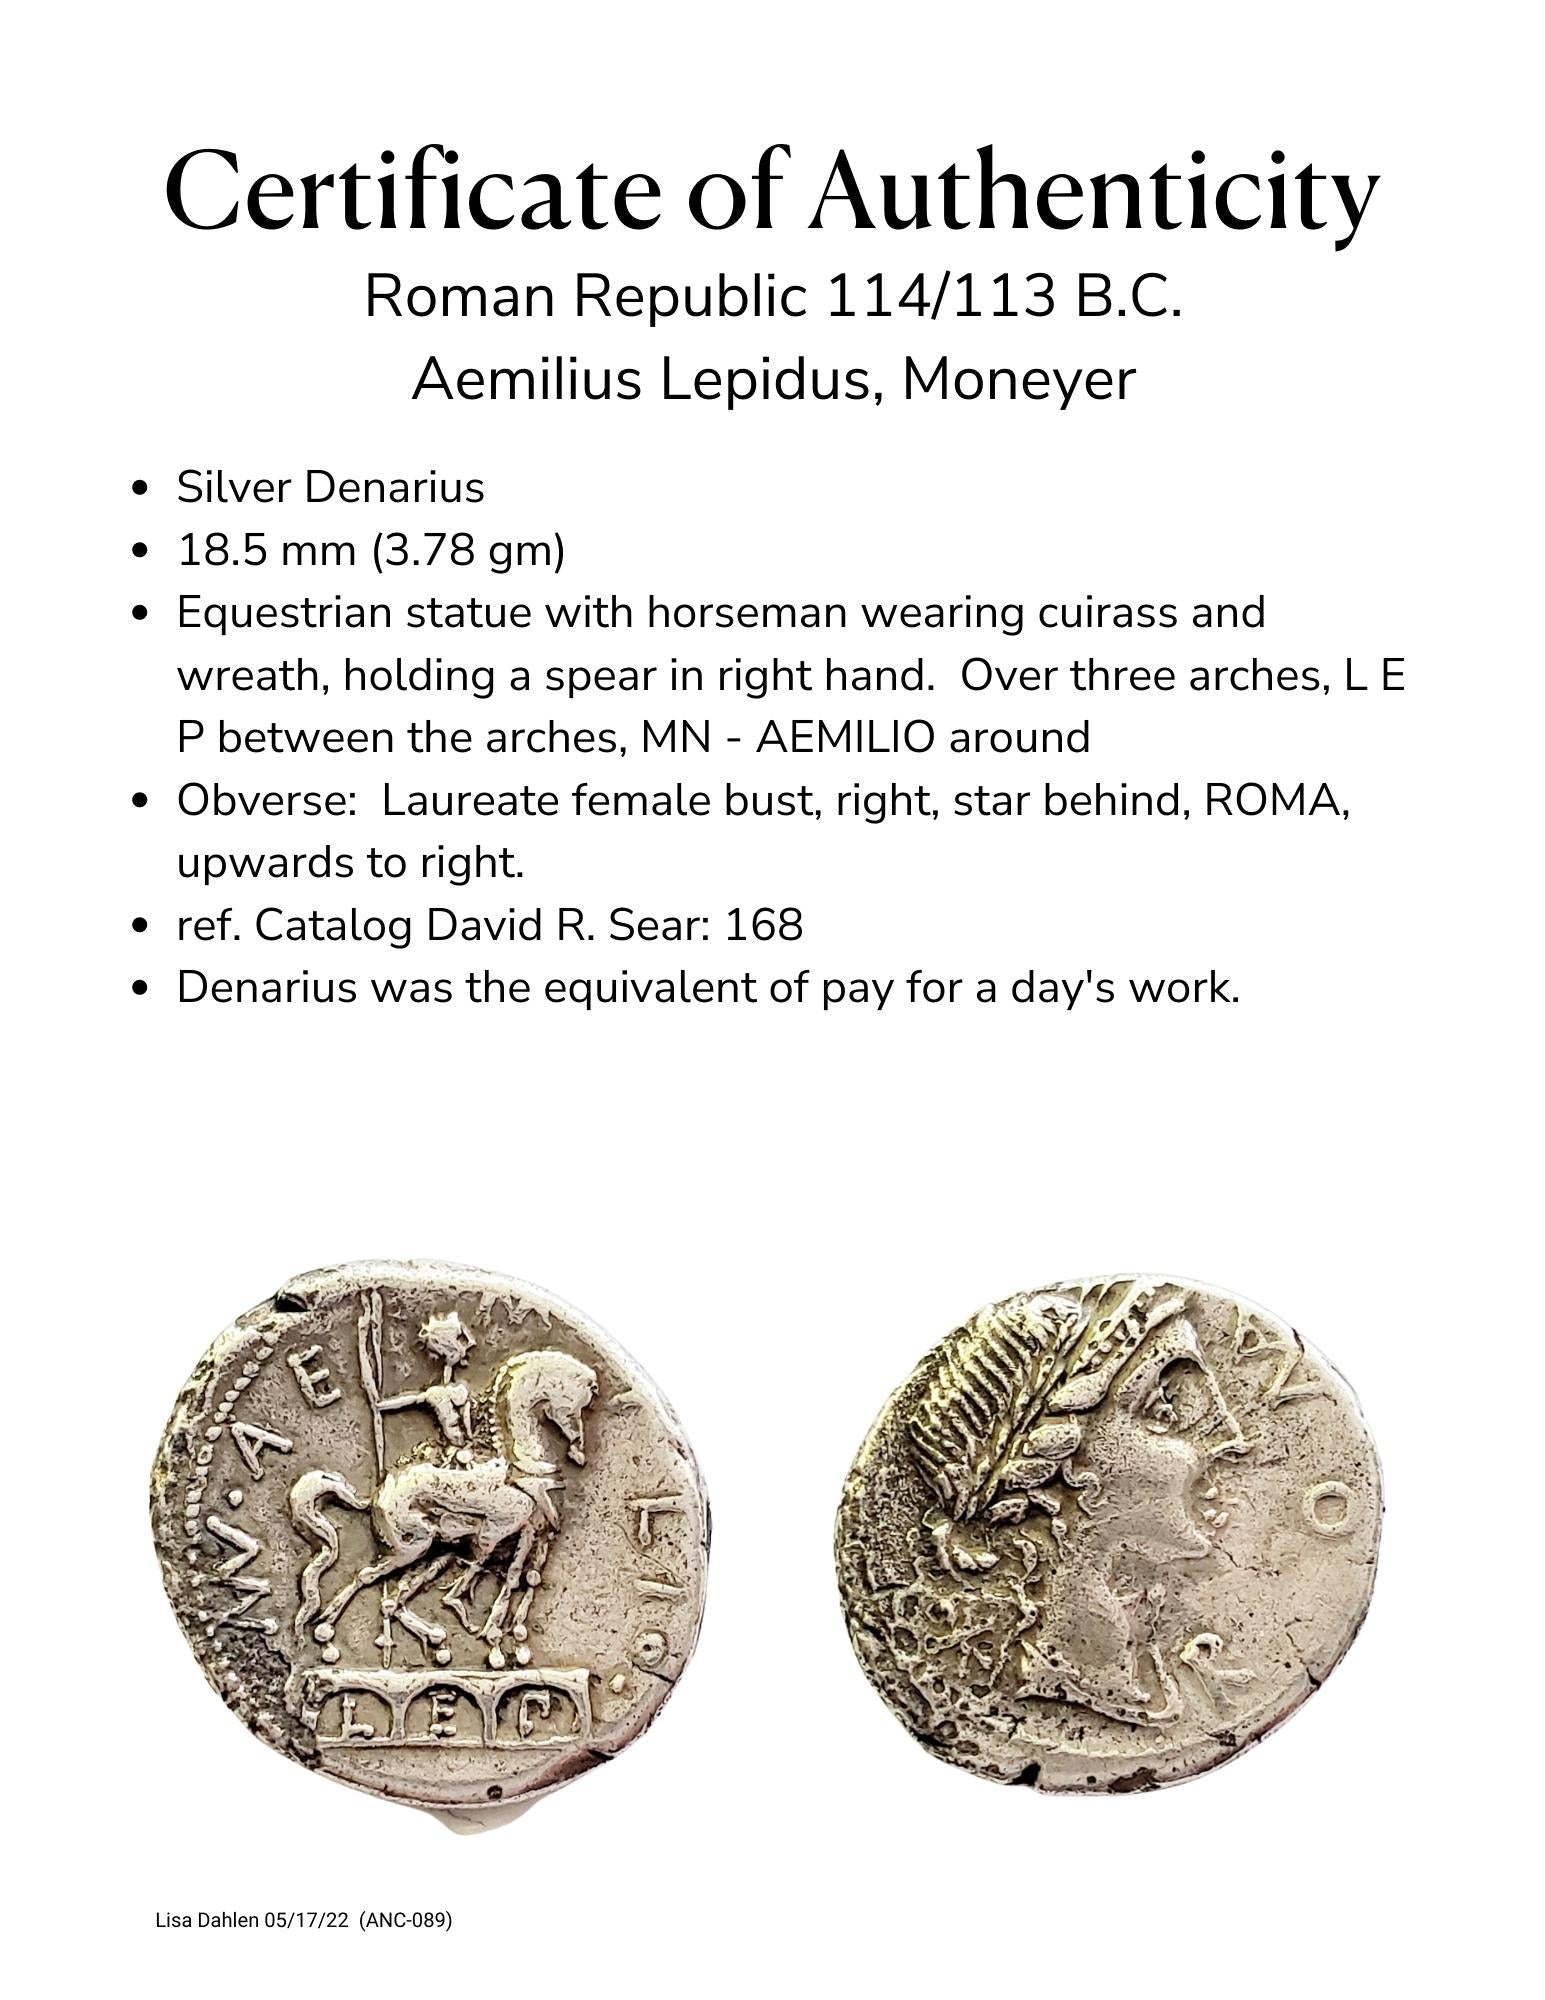 Ancient Roman Republic Silver Denarius Coin Pendant of Horse and Rider Statue on an arched platform certificate